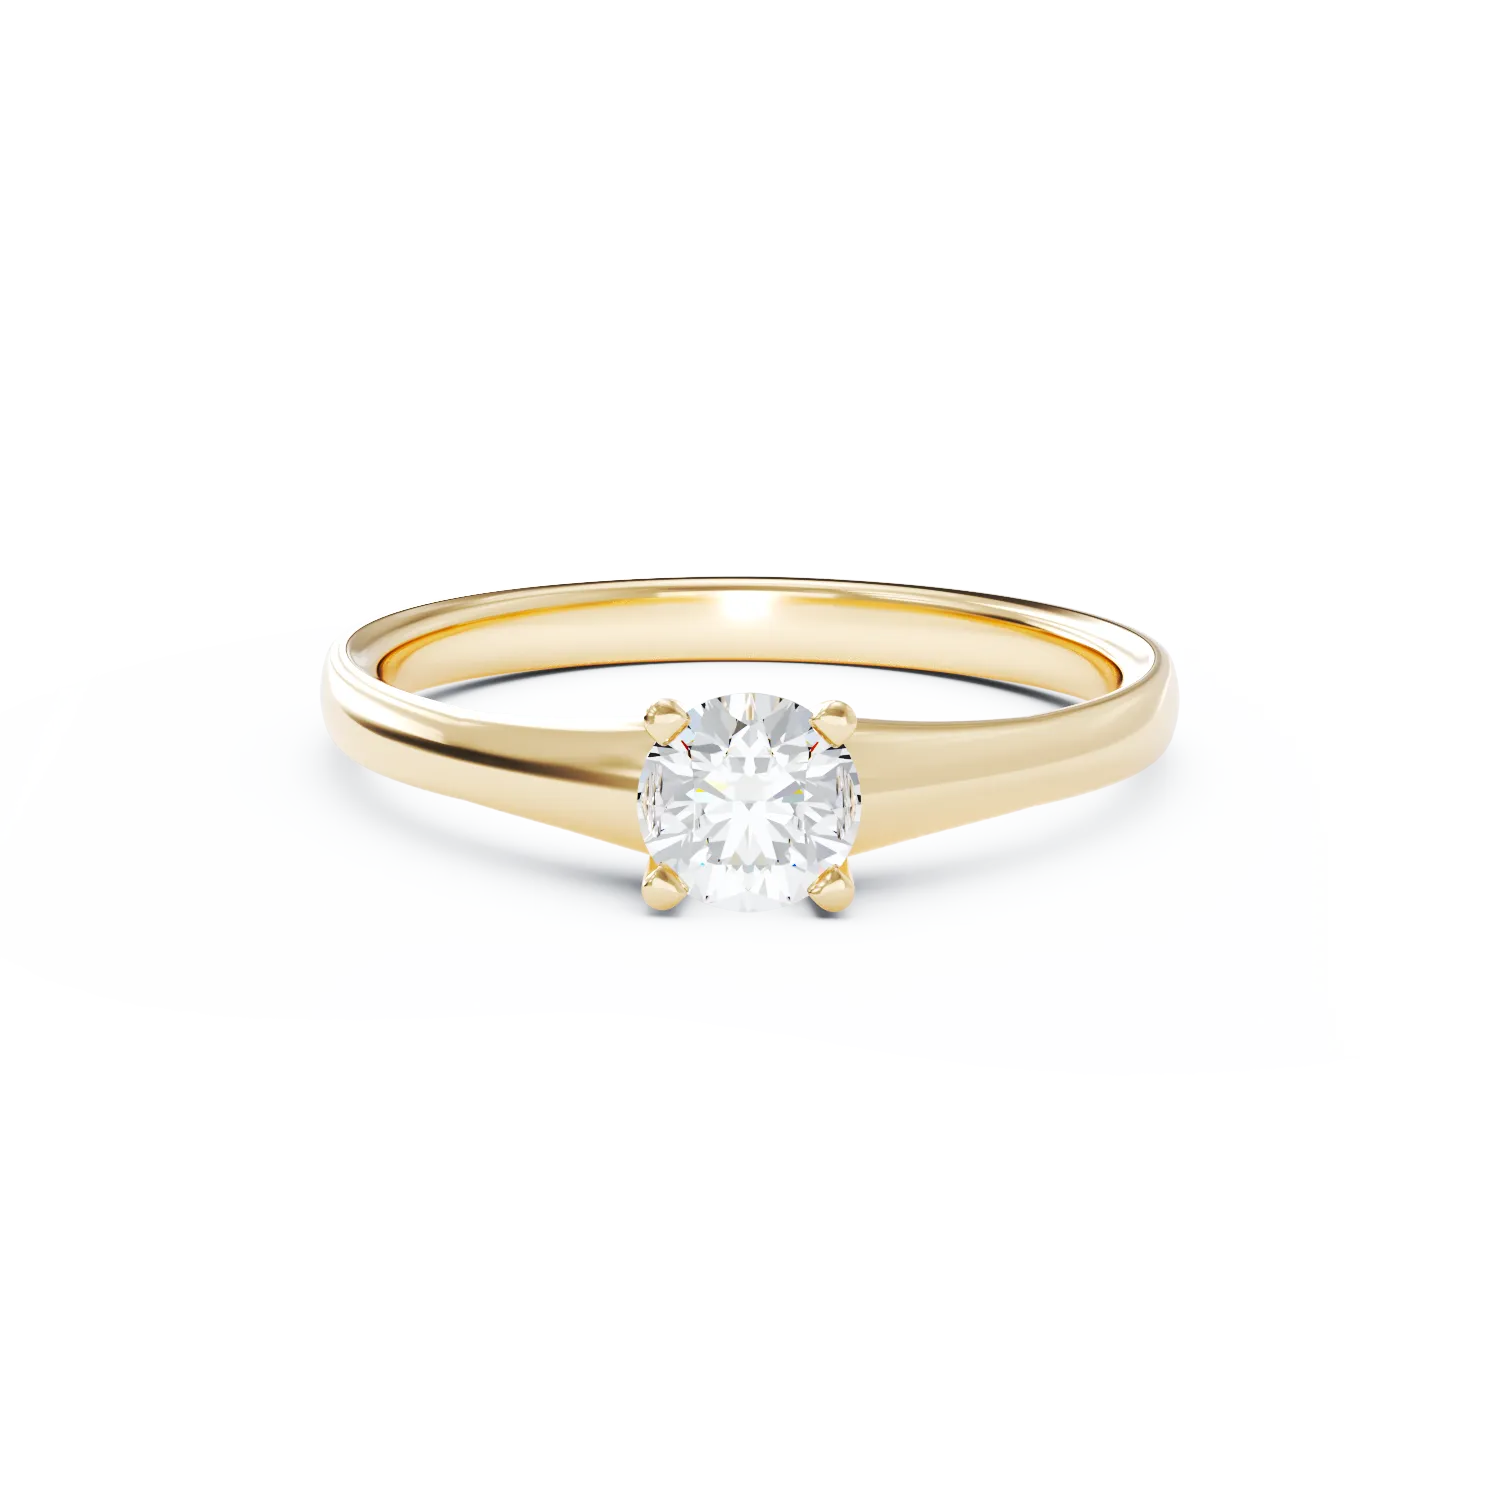 18K yellow gold engagement ring with 0.405ct solitaire diamond